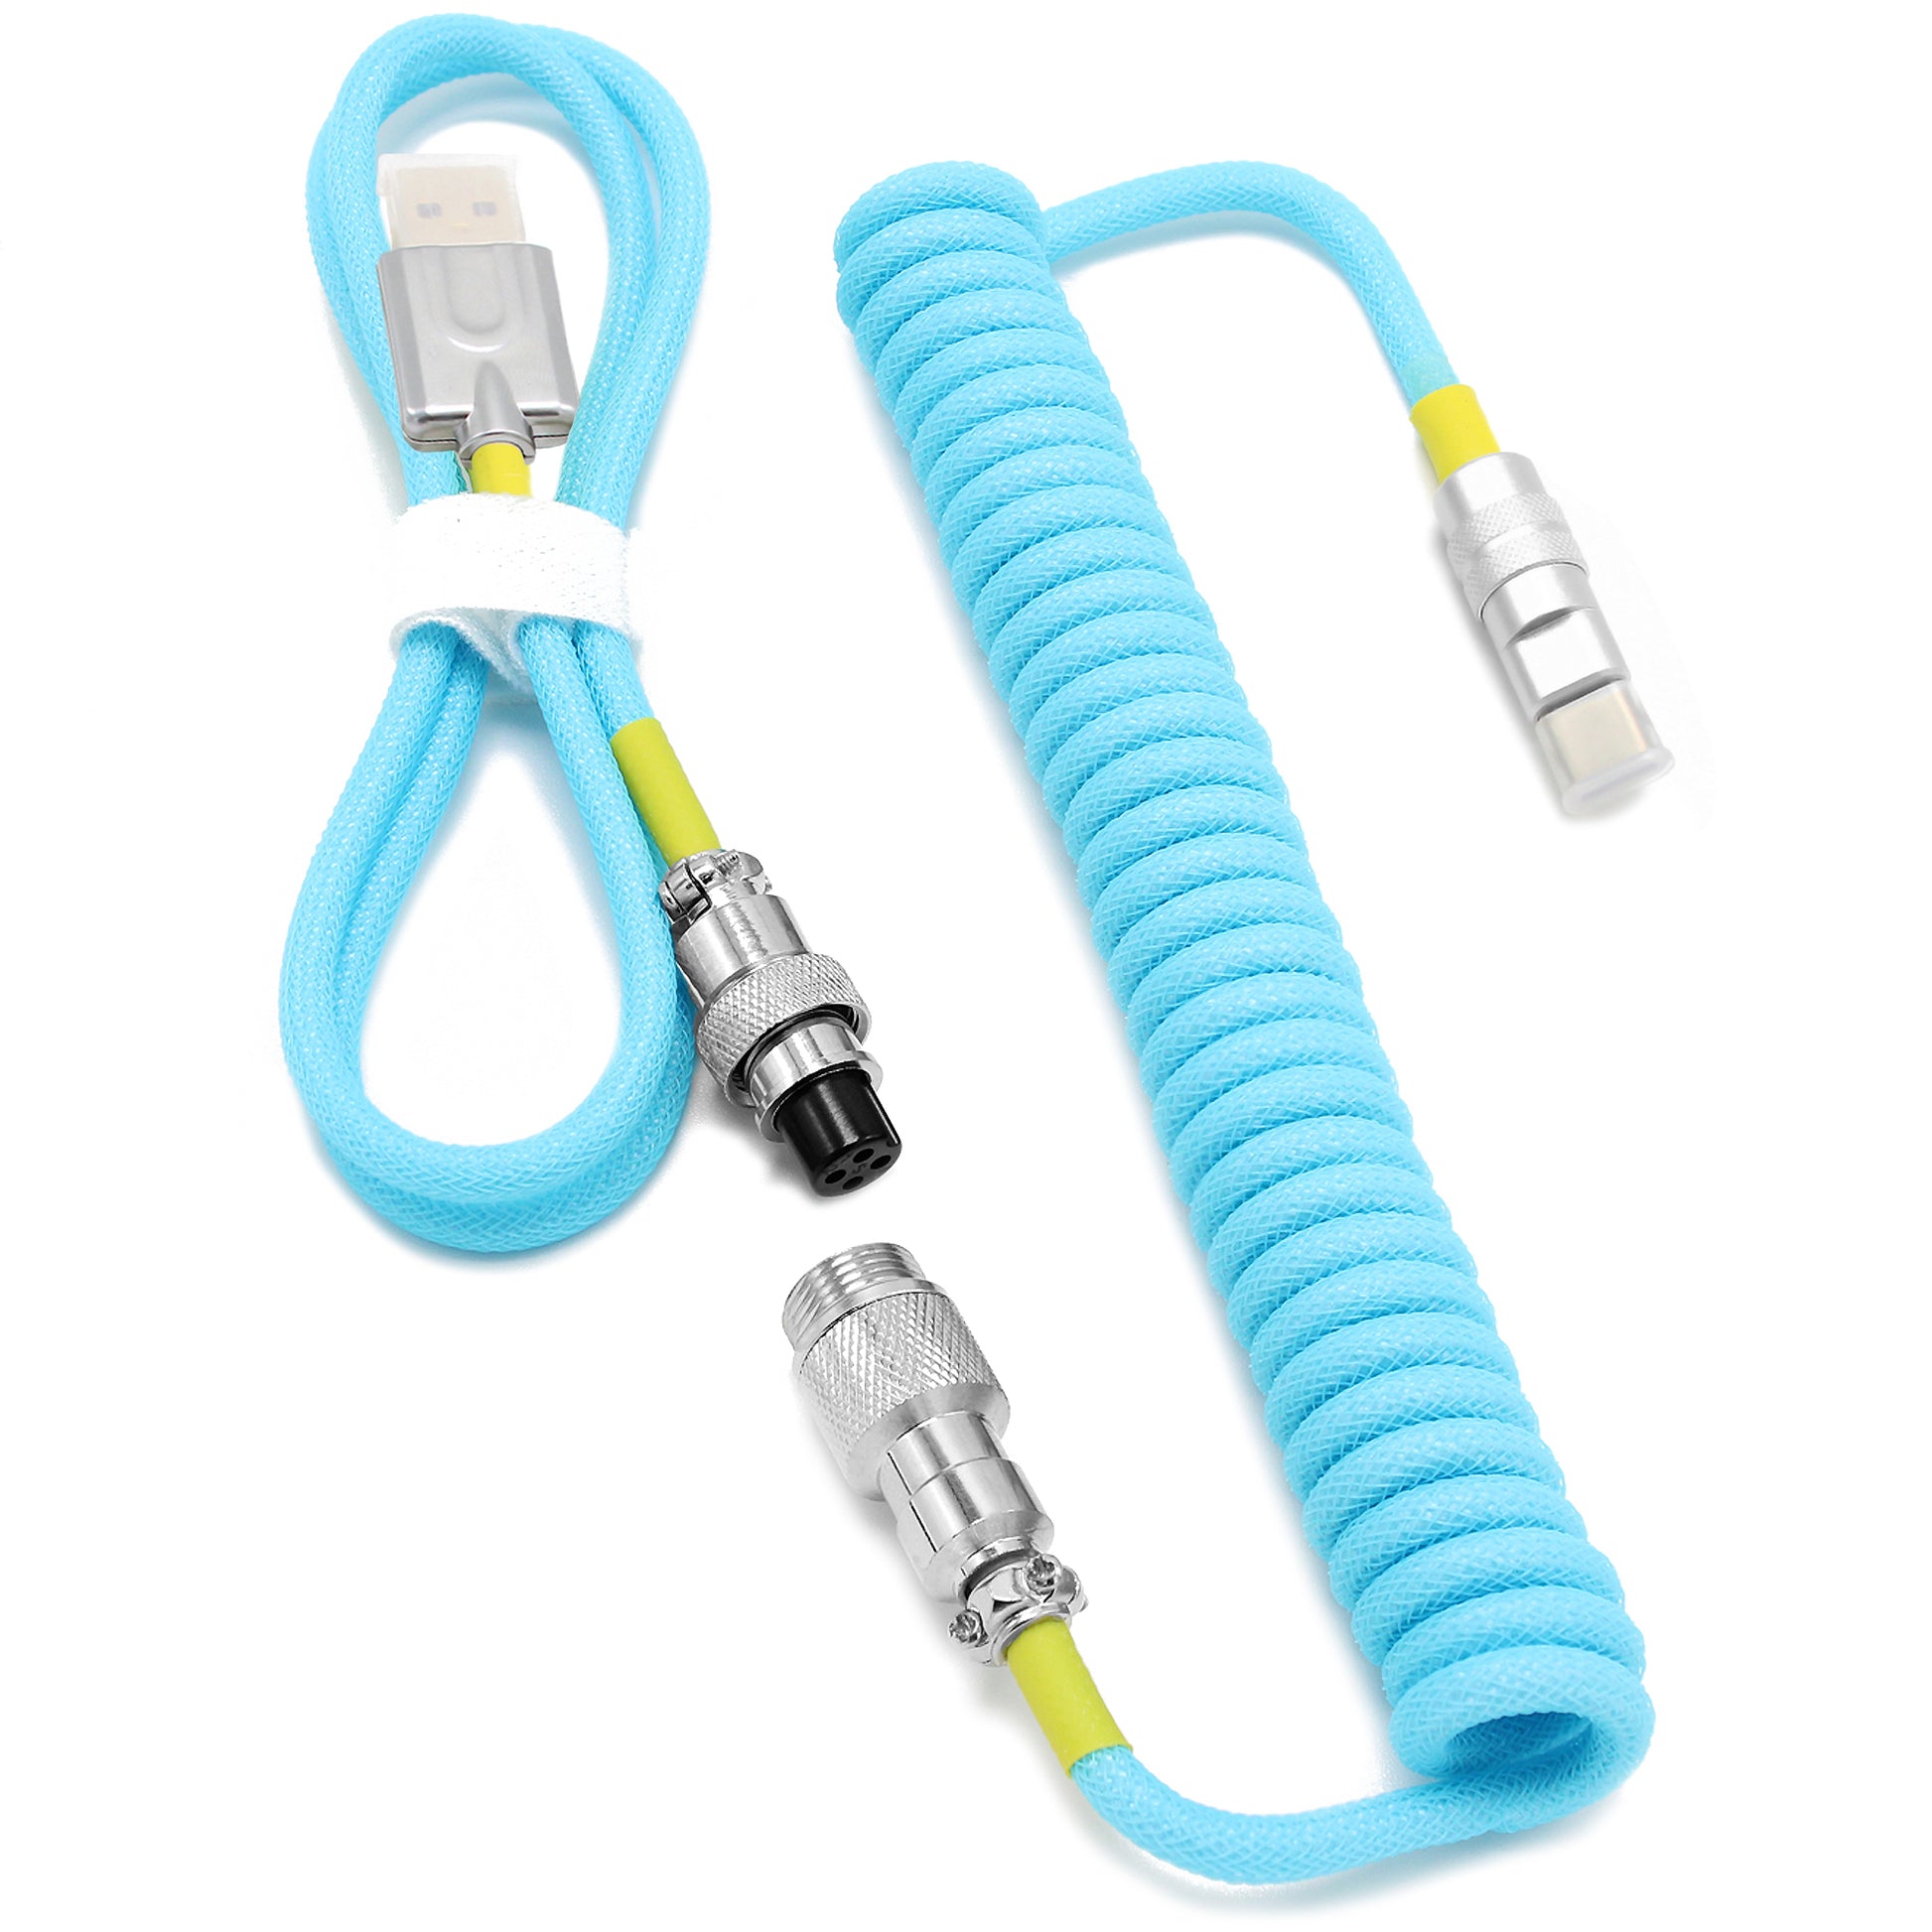 CUSTOM COILED CABLE GX16 -White – CLS Tech